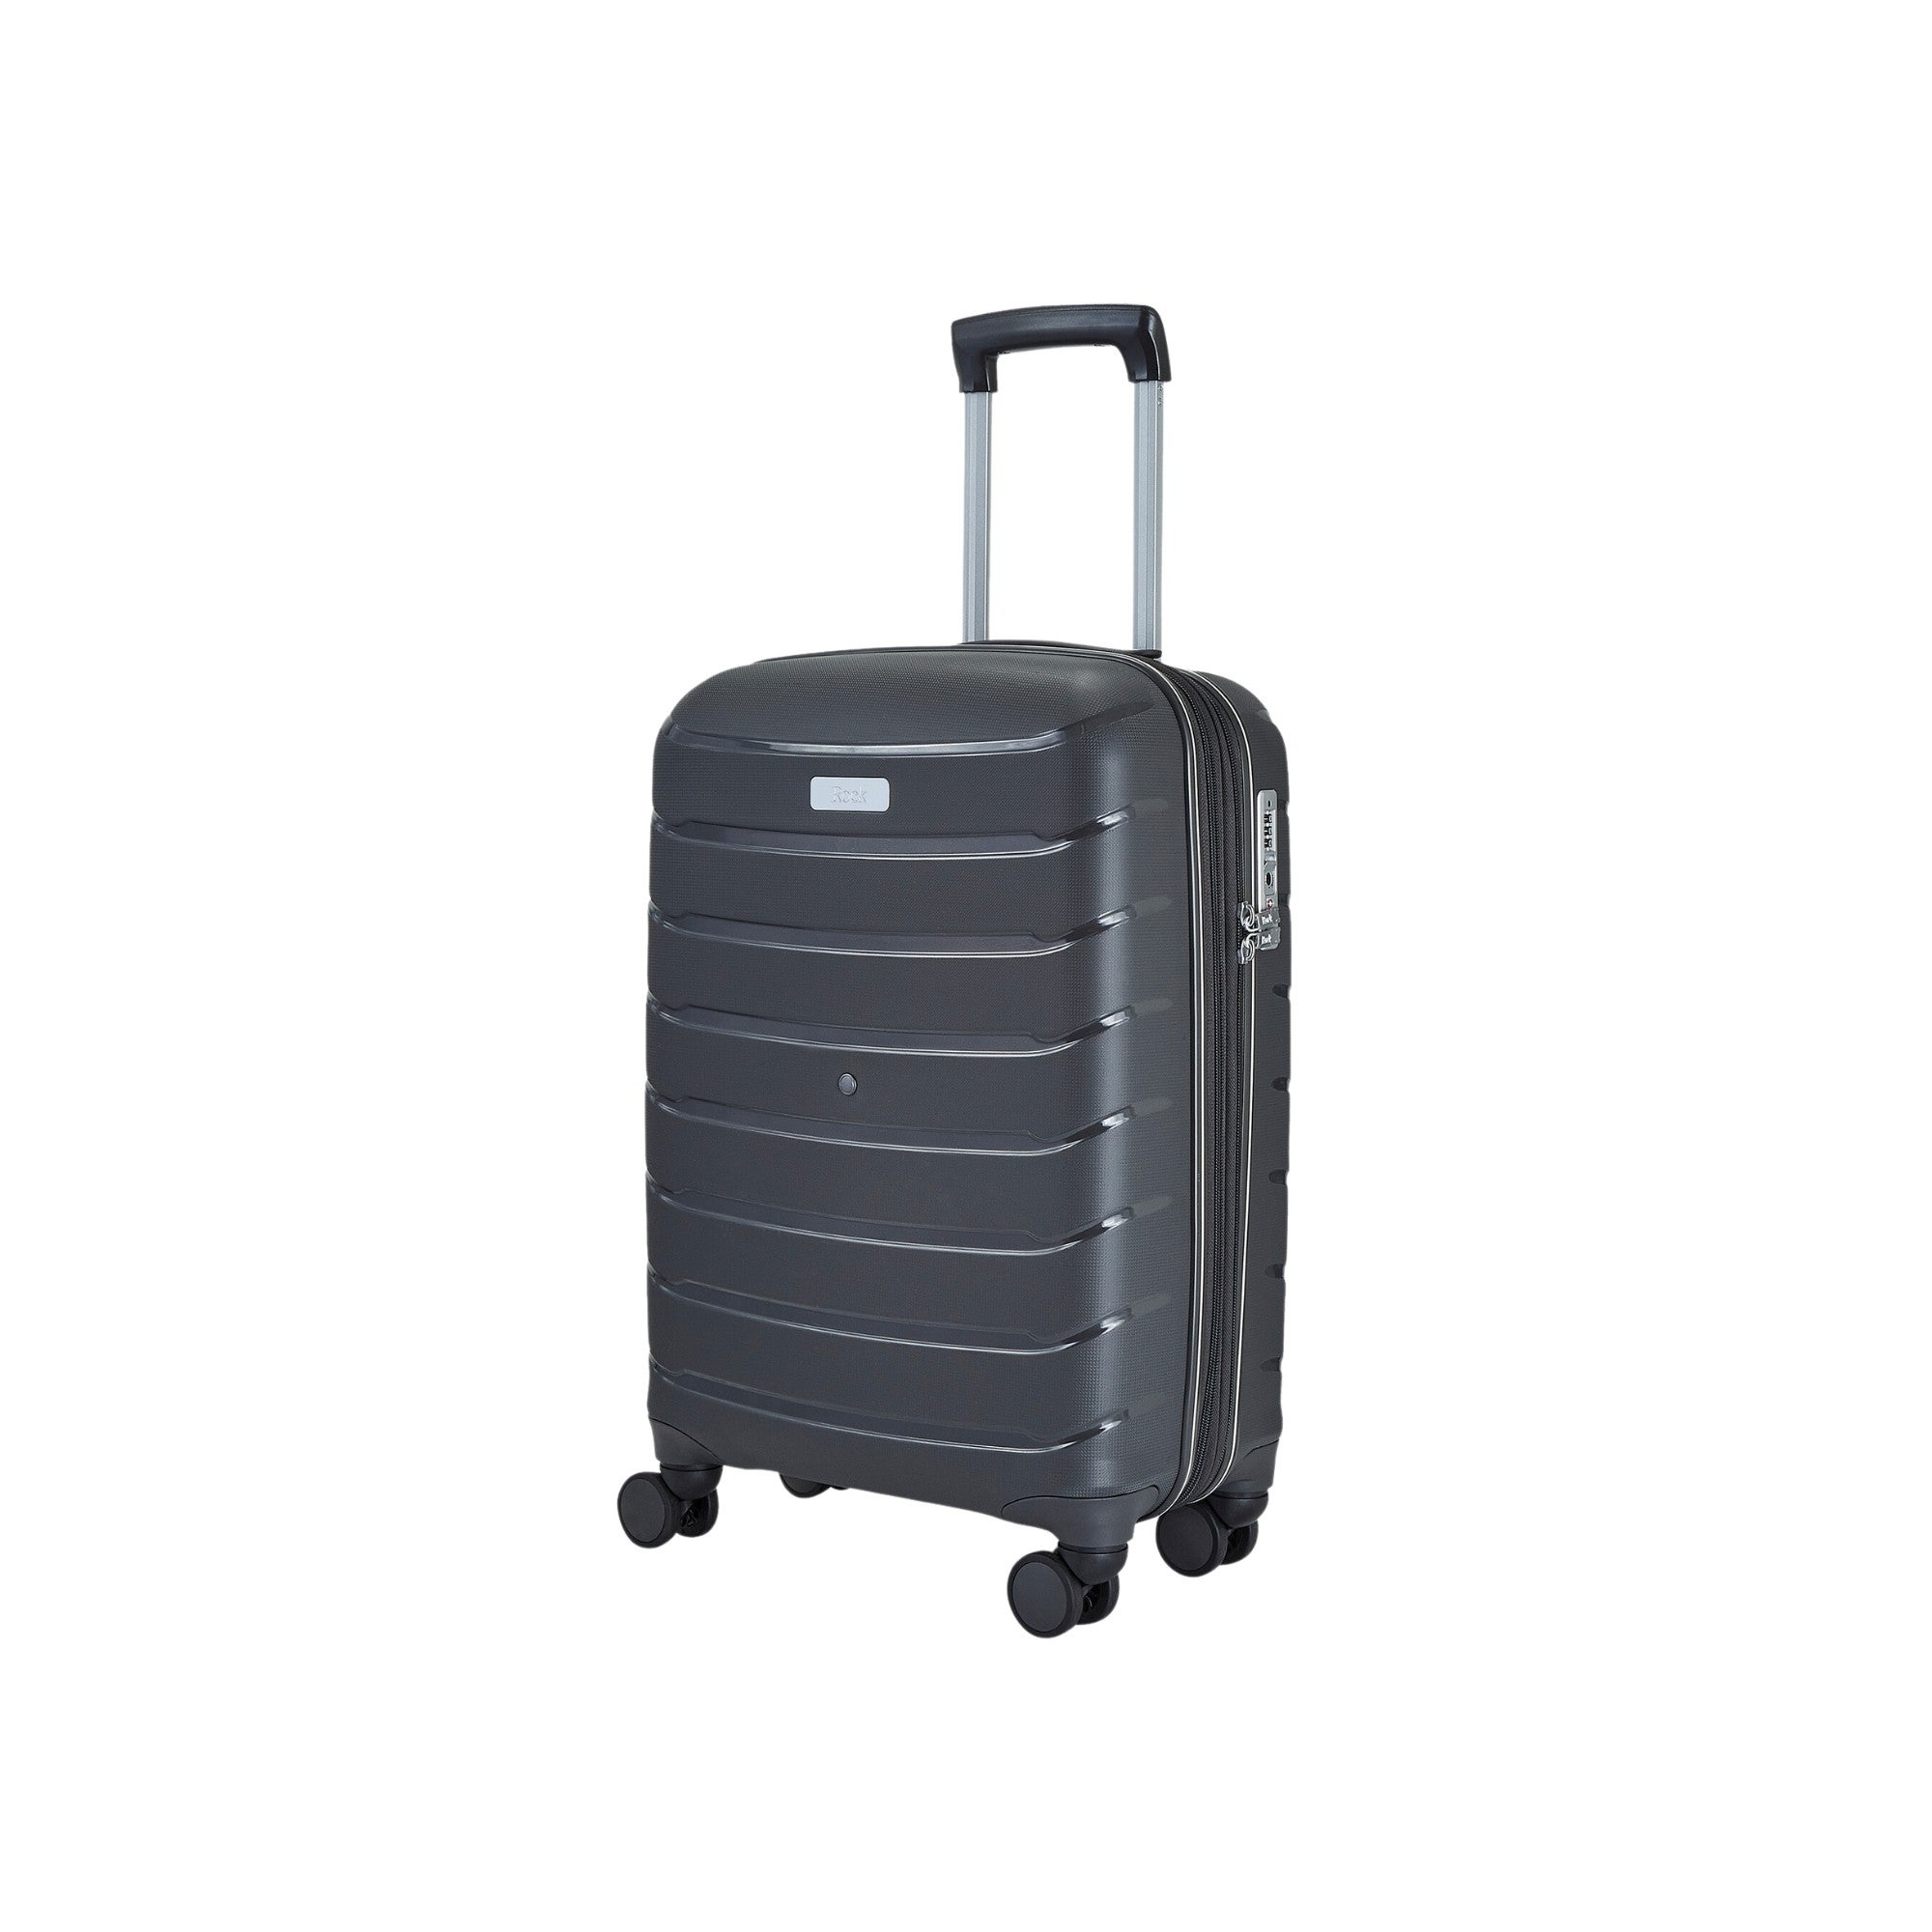 Rock Luggage Prime Suitcase Charcoal